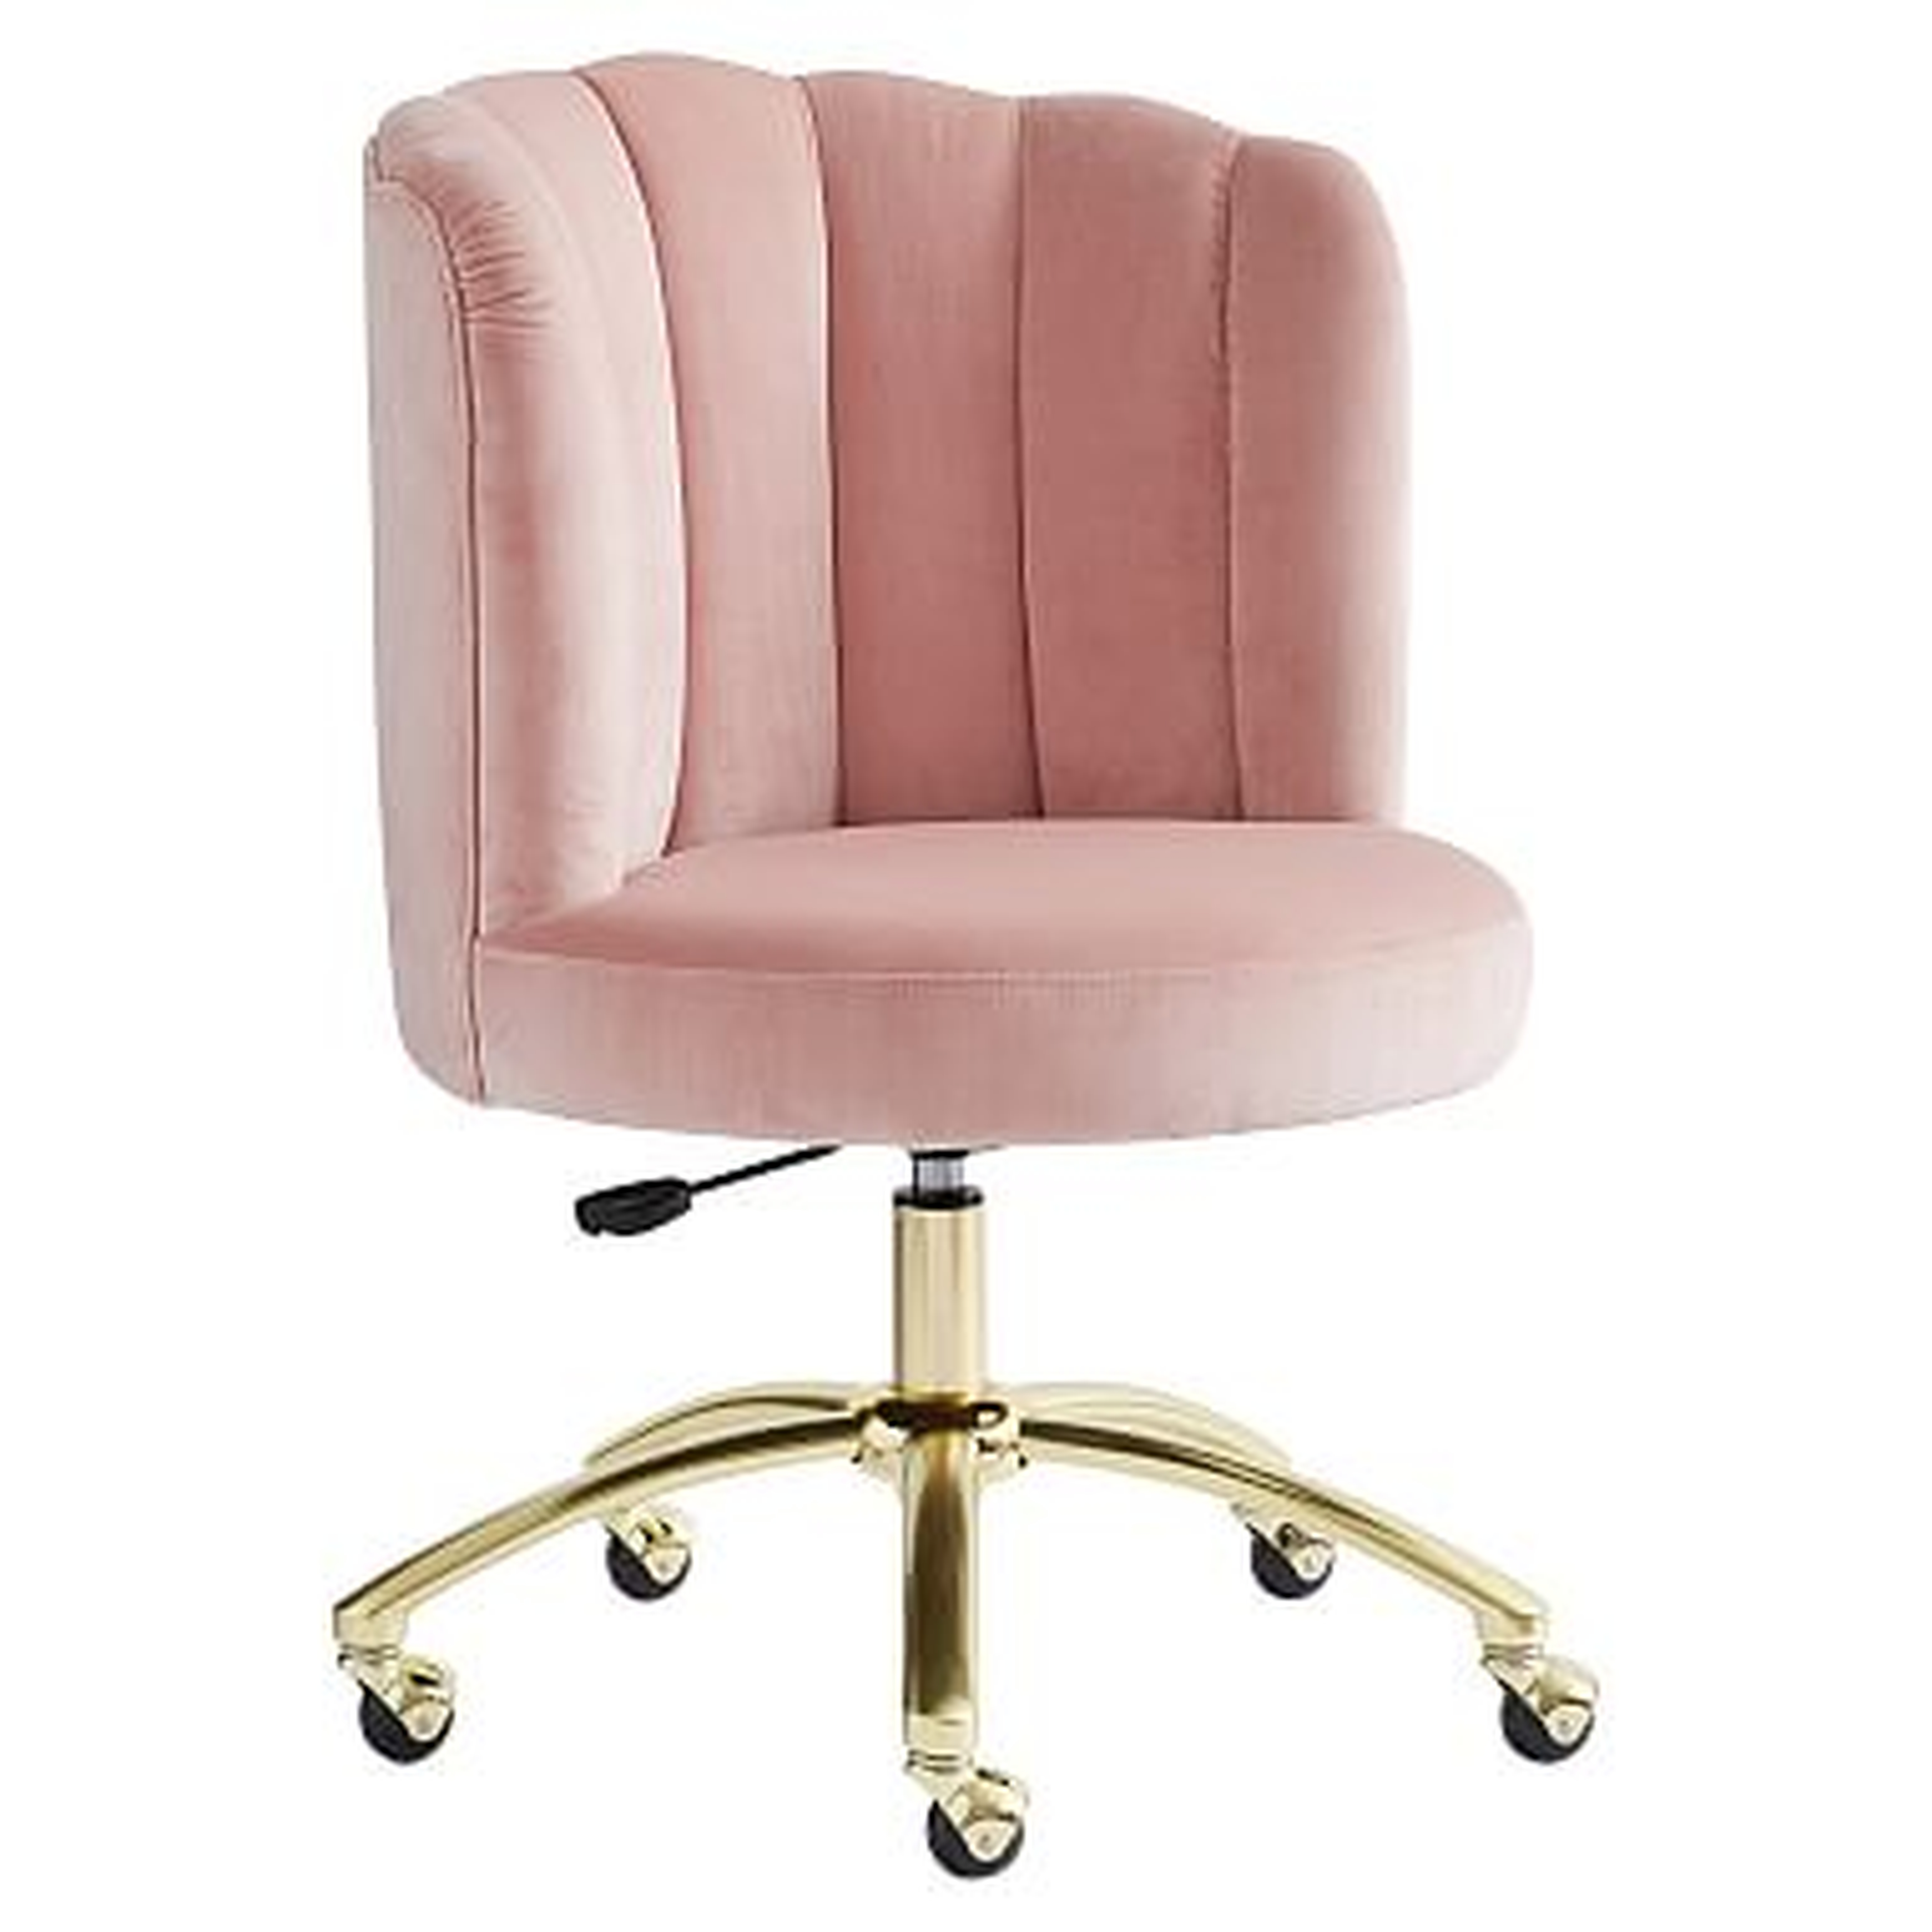 Channel Stitch Task Chair, Luxe Velvet Dusty Rose - Pottery Barn Teen